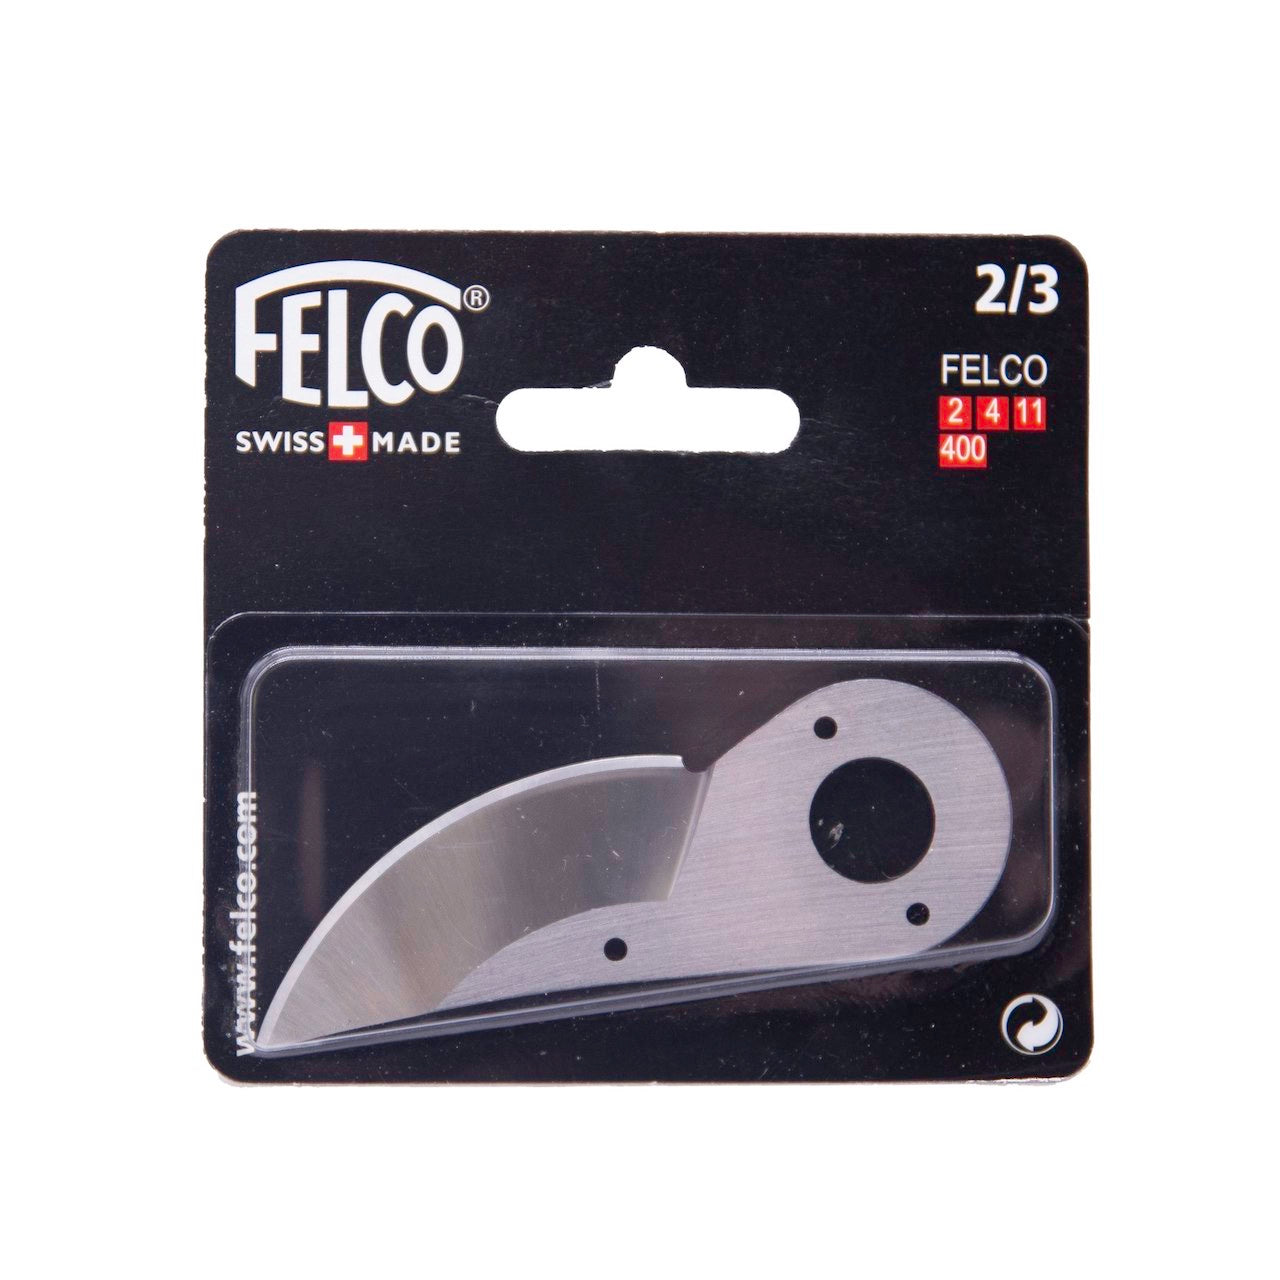 FELCO 2 Replacement Blade (2/3)